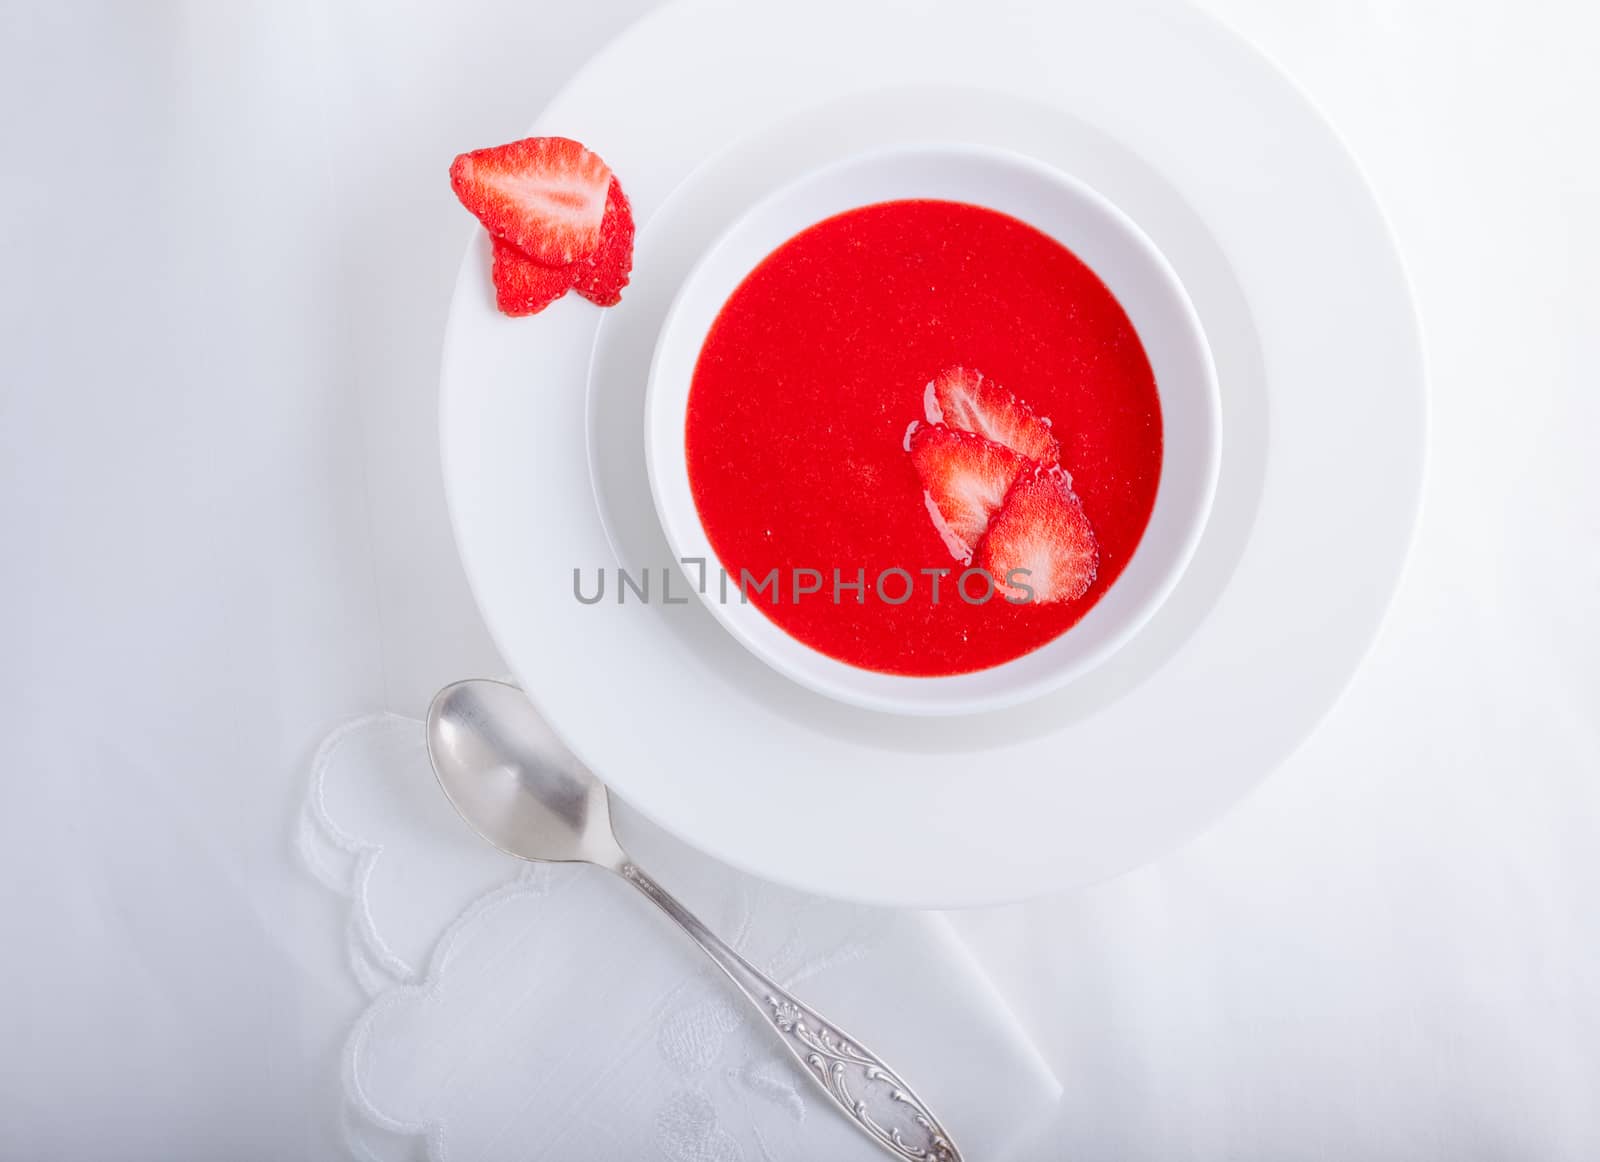 Strawberry soup with white napkin on a table